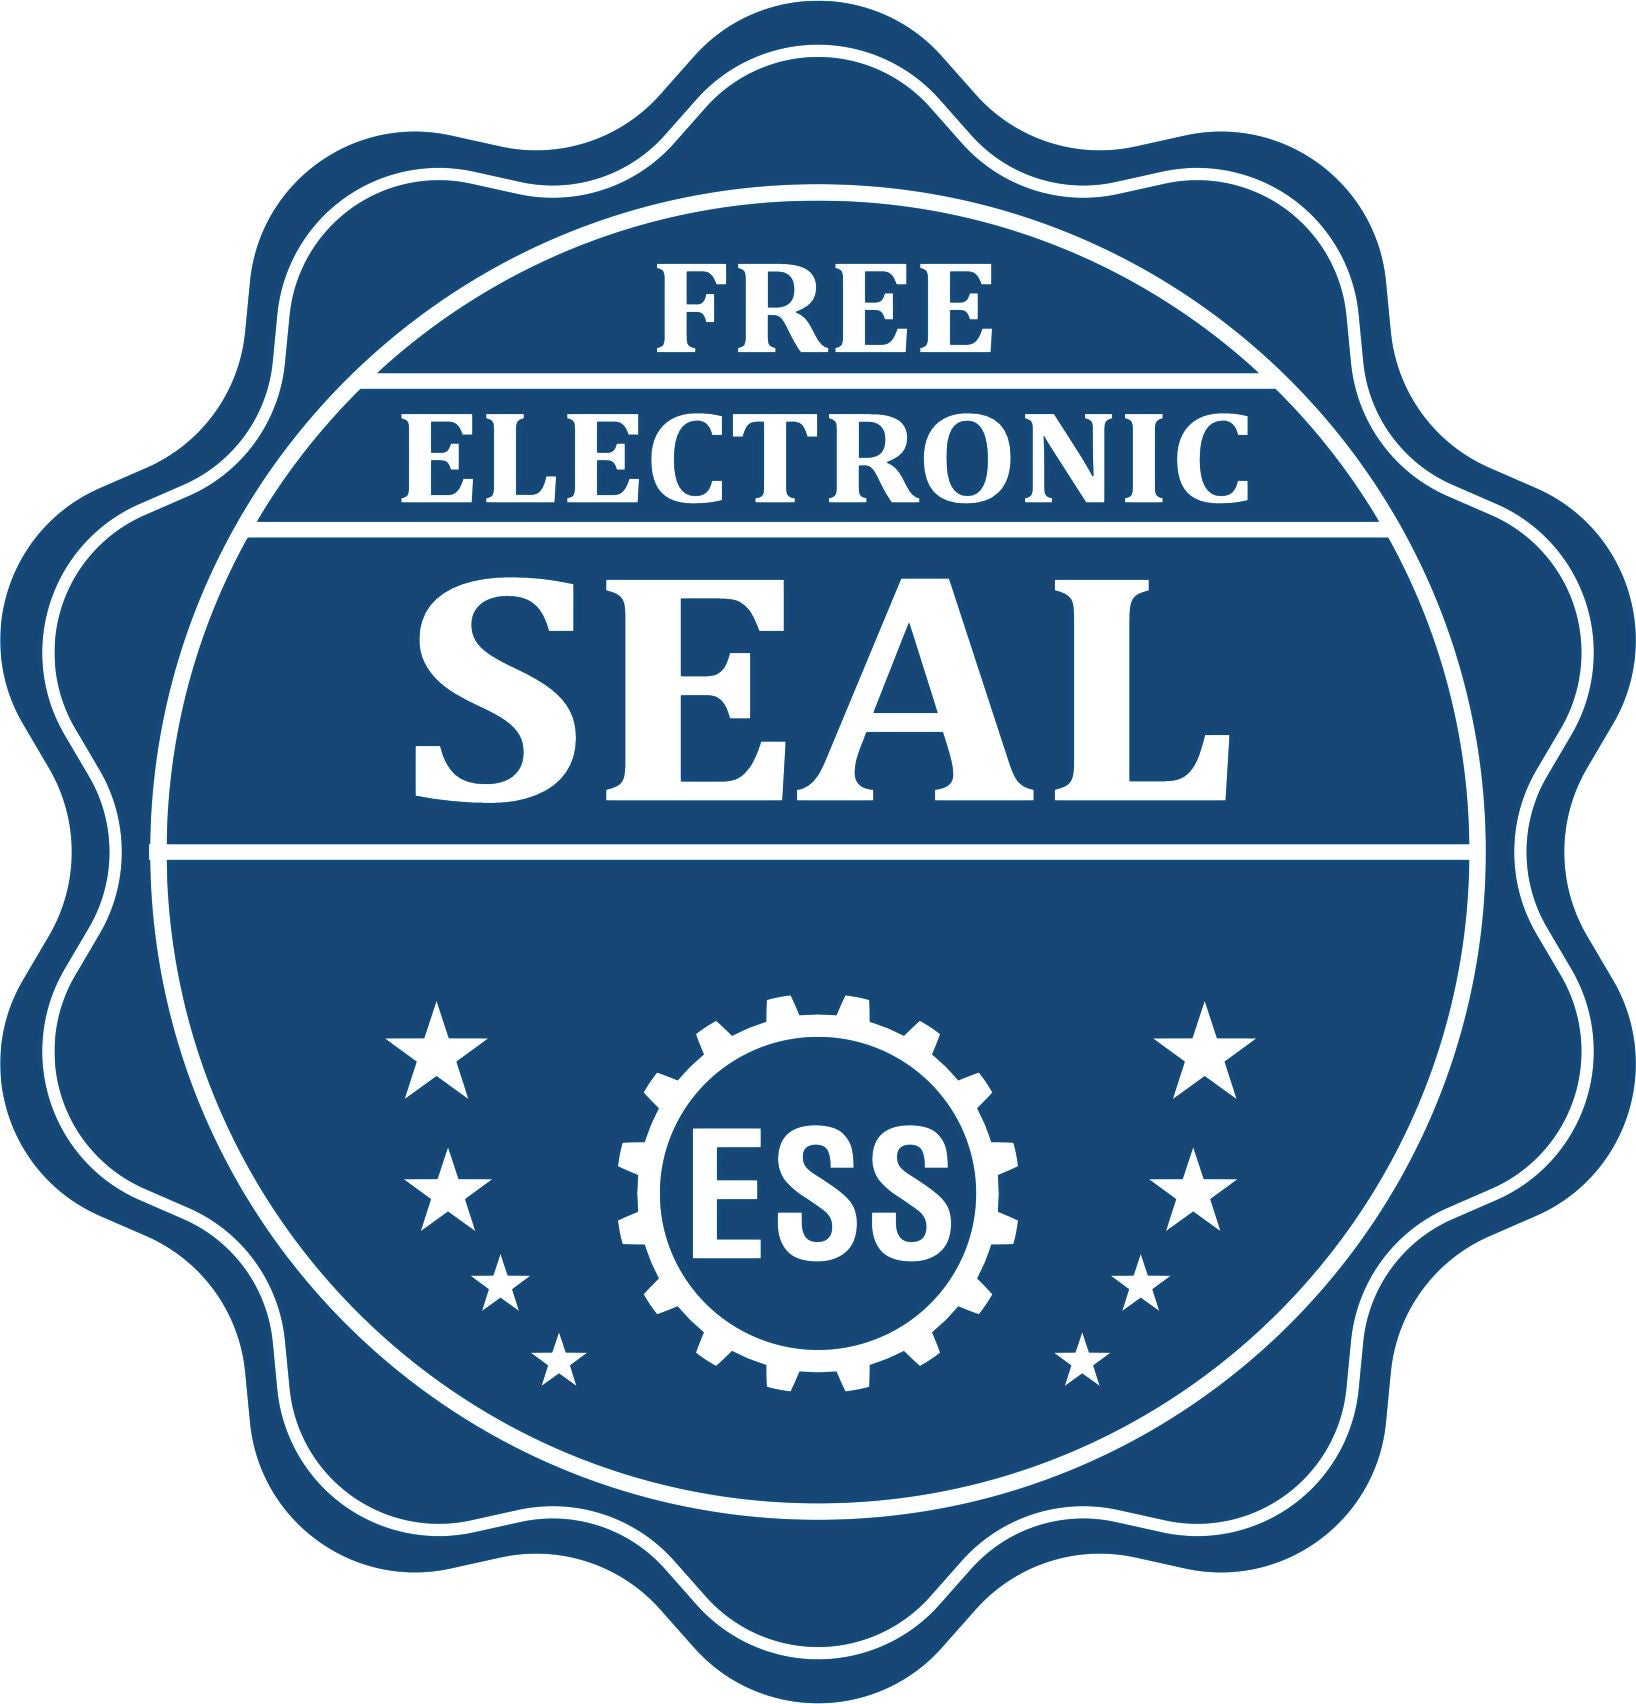 A badge showing a free electronic seal for the Gift Massachusetts Engineer Seal with stars and the ESS gear on the emblem.